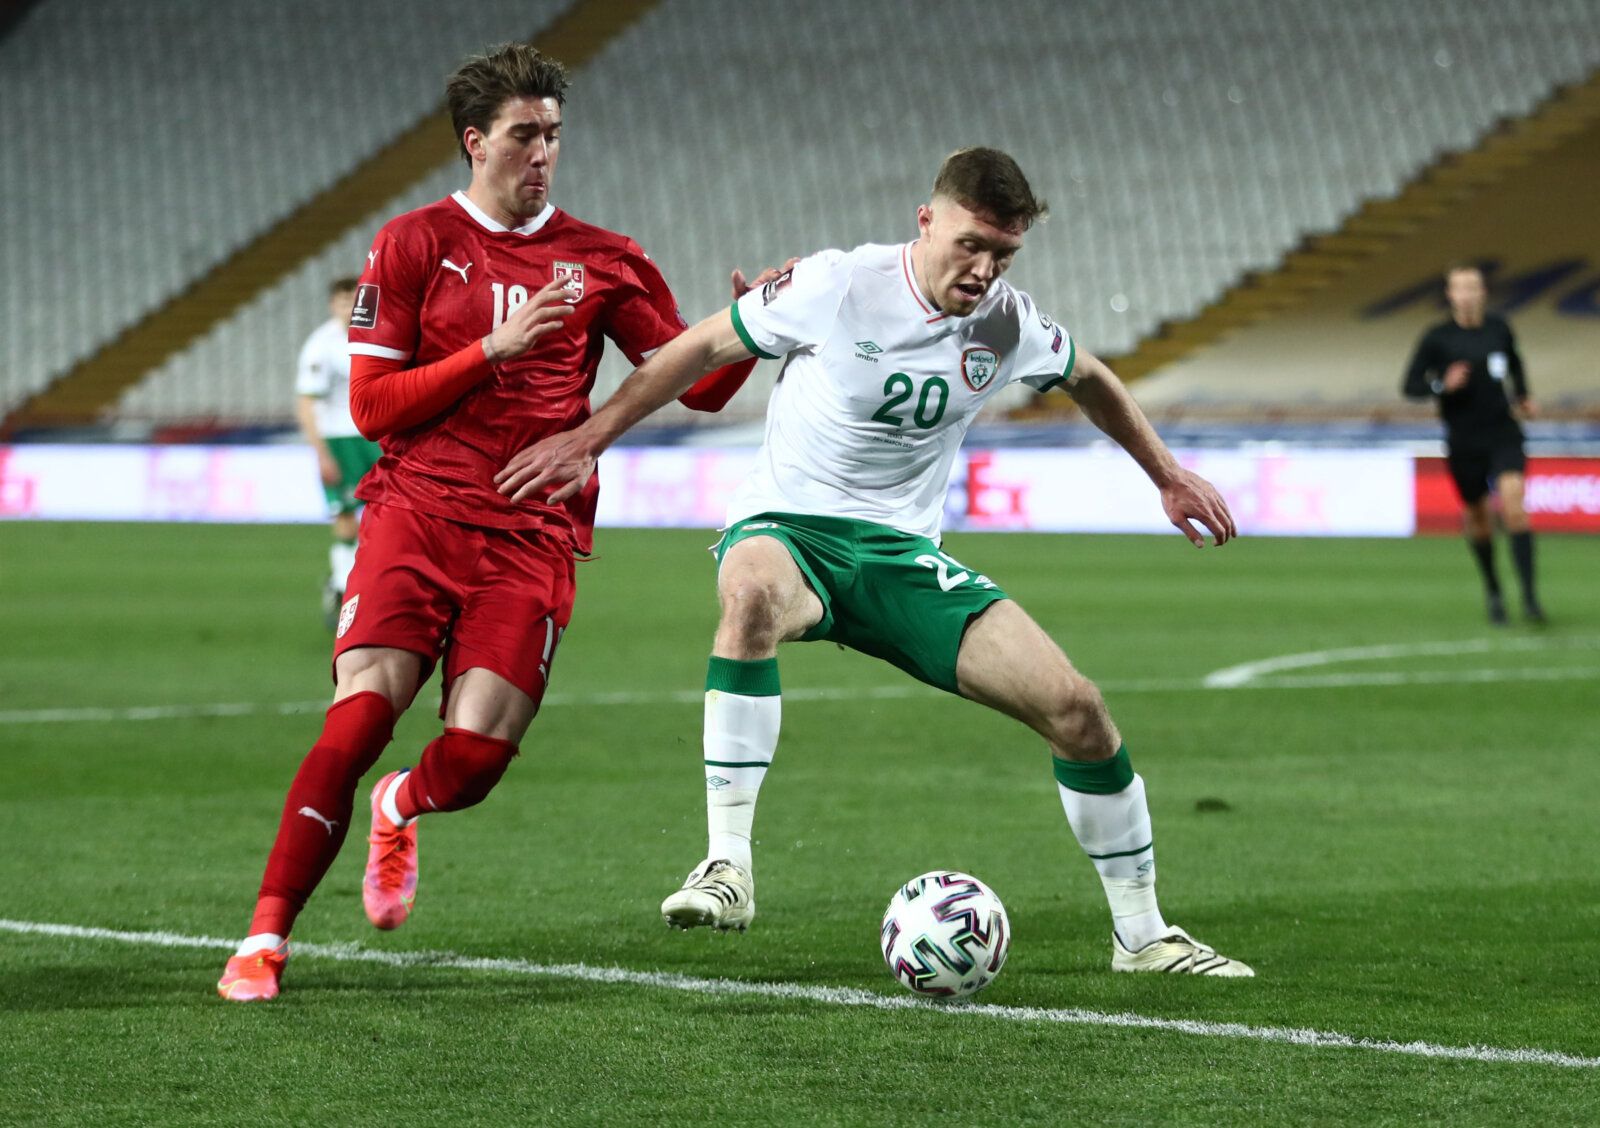 Soccer Football - World Cup Qualifiers Europe - Group A - Serbia v Republic of Ireland - Rajko Mitic Stadium, Belgrade, Serbia - March 24, 2021 Republic of Ireland's Dara O'Shea in action with Serbia's Dusan Vlahovic REUTERS/Marko Djurica